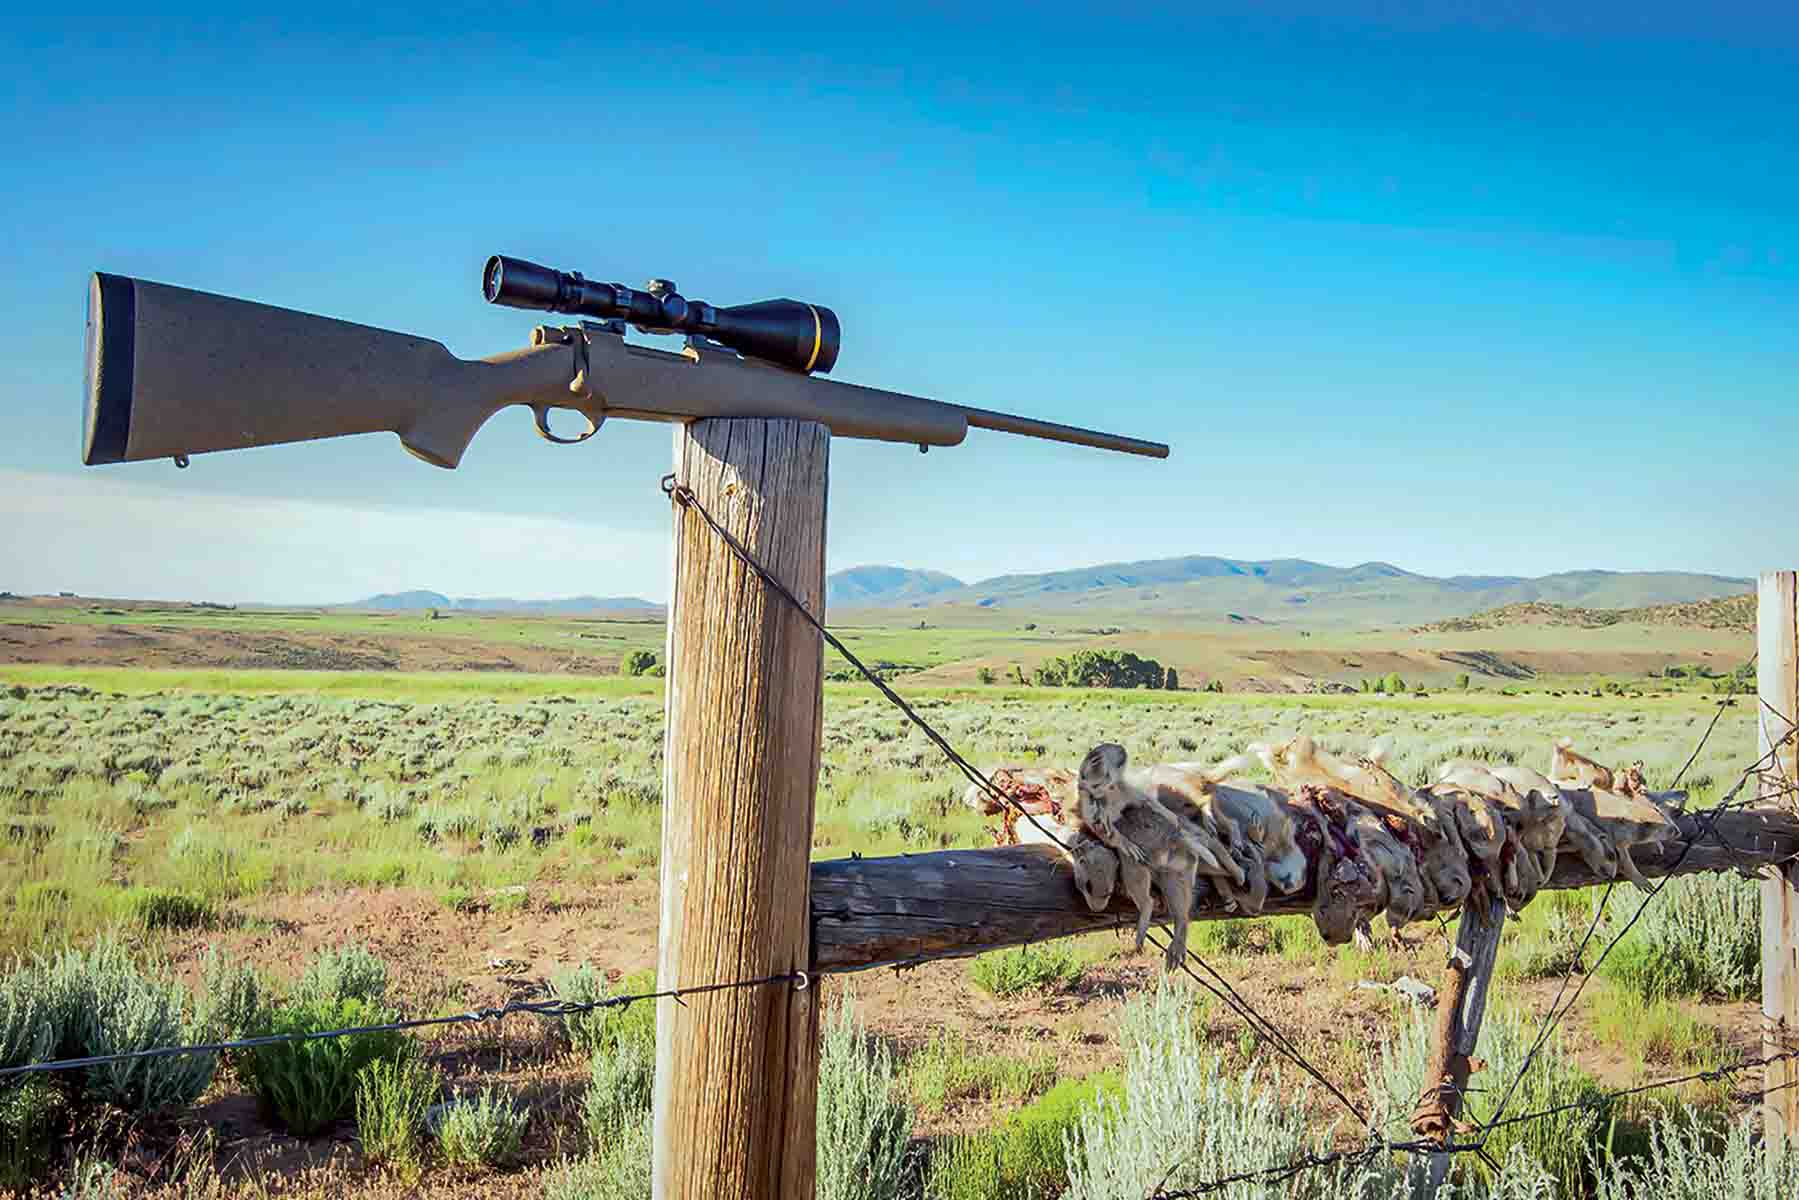 This rifle and cartridge combination has proven itself in the field year-after-year. At the Spur Ranch, it proved itself yet again.